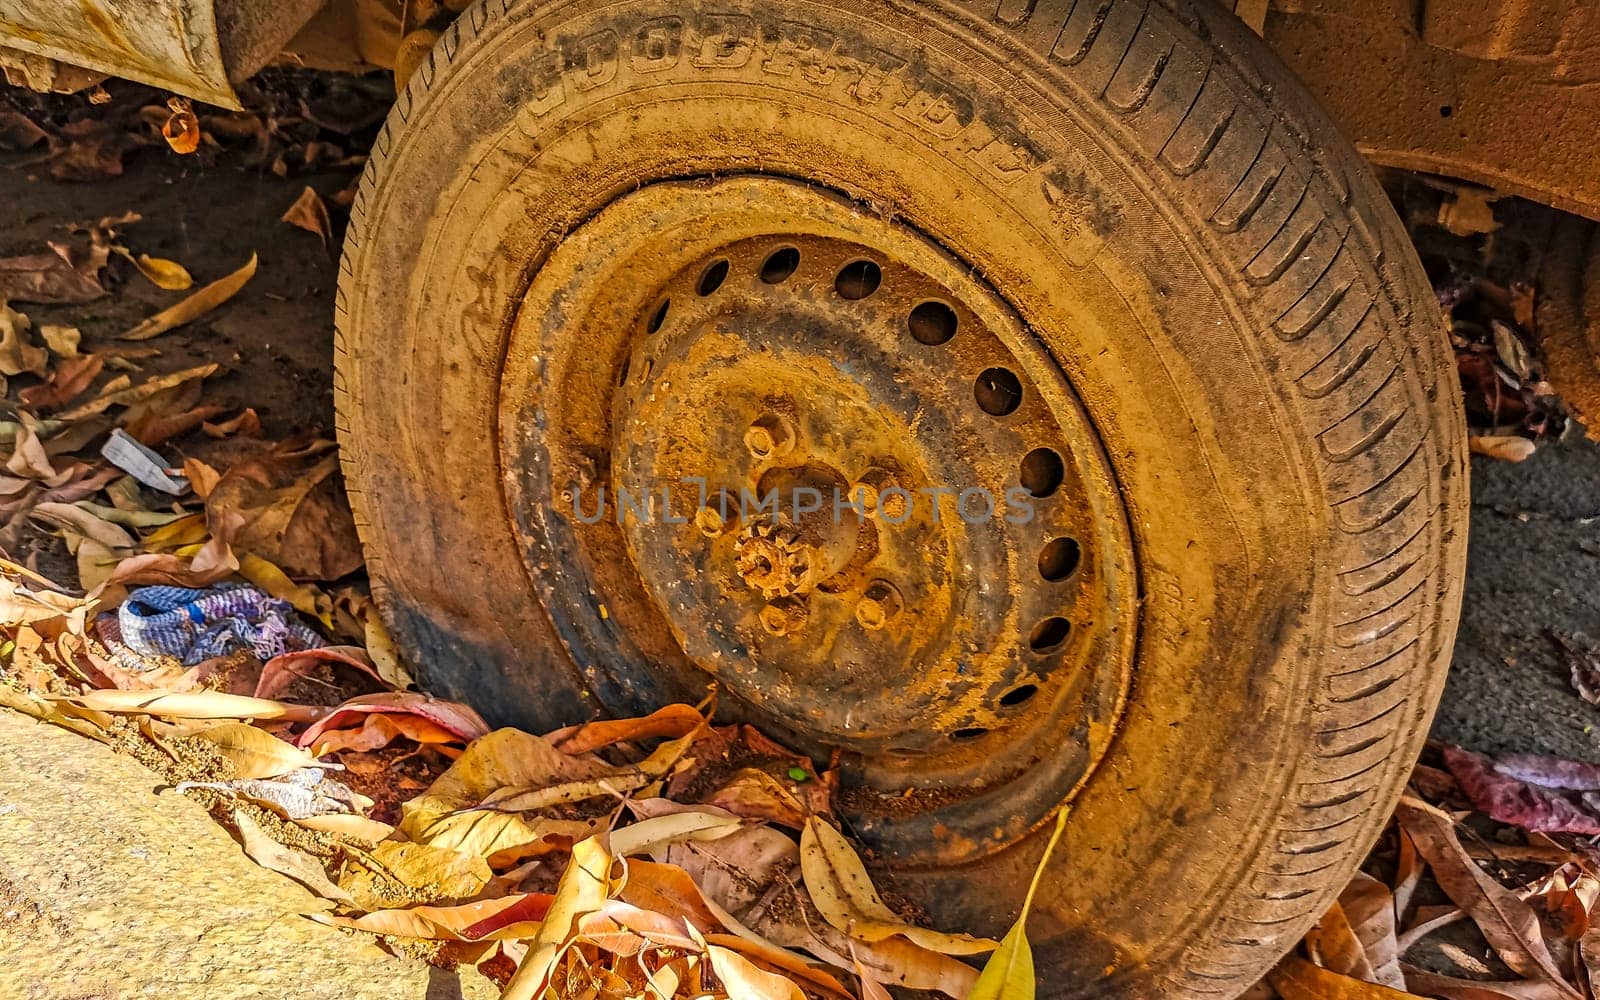 Flat rusted old tire on the car Puerto Escondido Mexico. by Arkadij